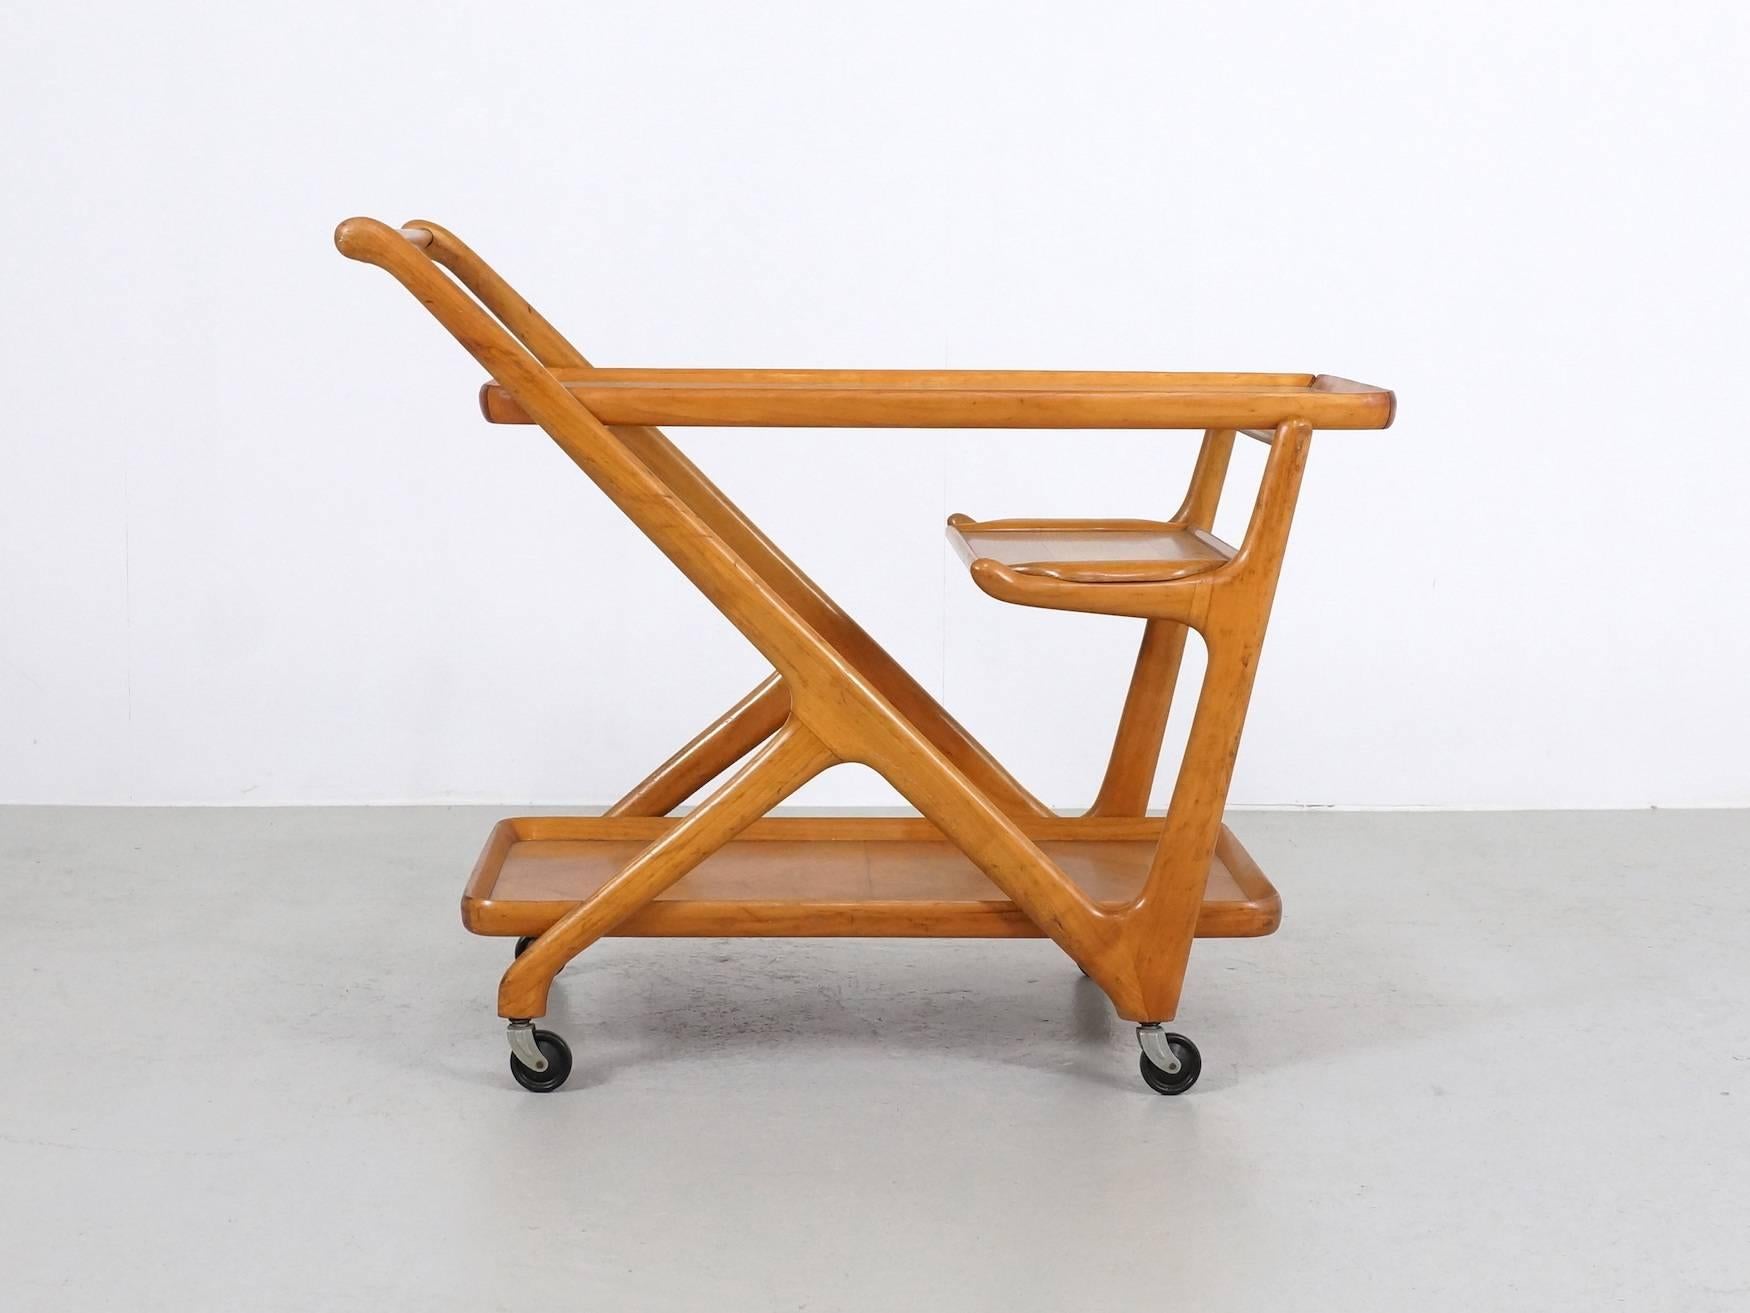 Solid walnut wood bar cart designed by Cesare Lacca for Cassina in 1951. These trolleys are well-known and the separated serving tray under the top make it an attractive decoration piece. The beautiful organic shape makes it a beauty!!
The glass